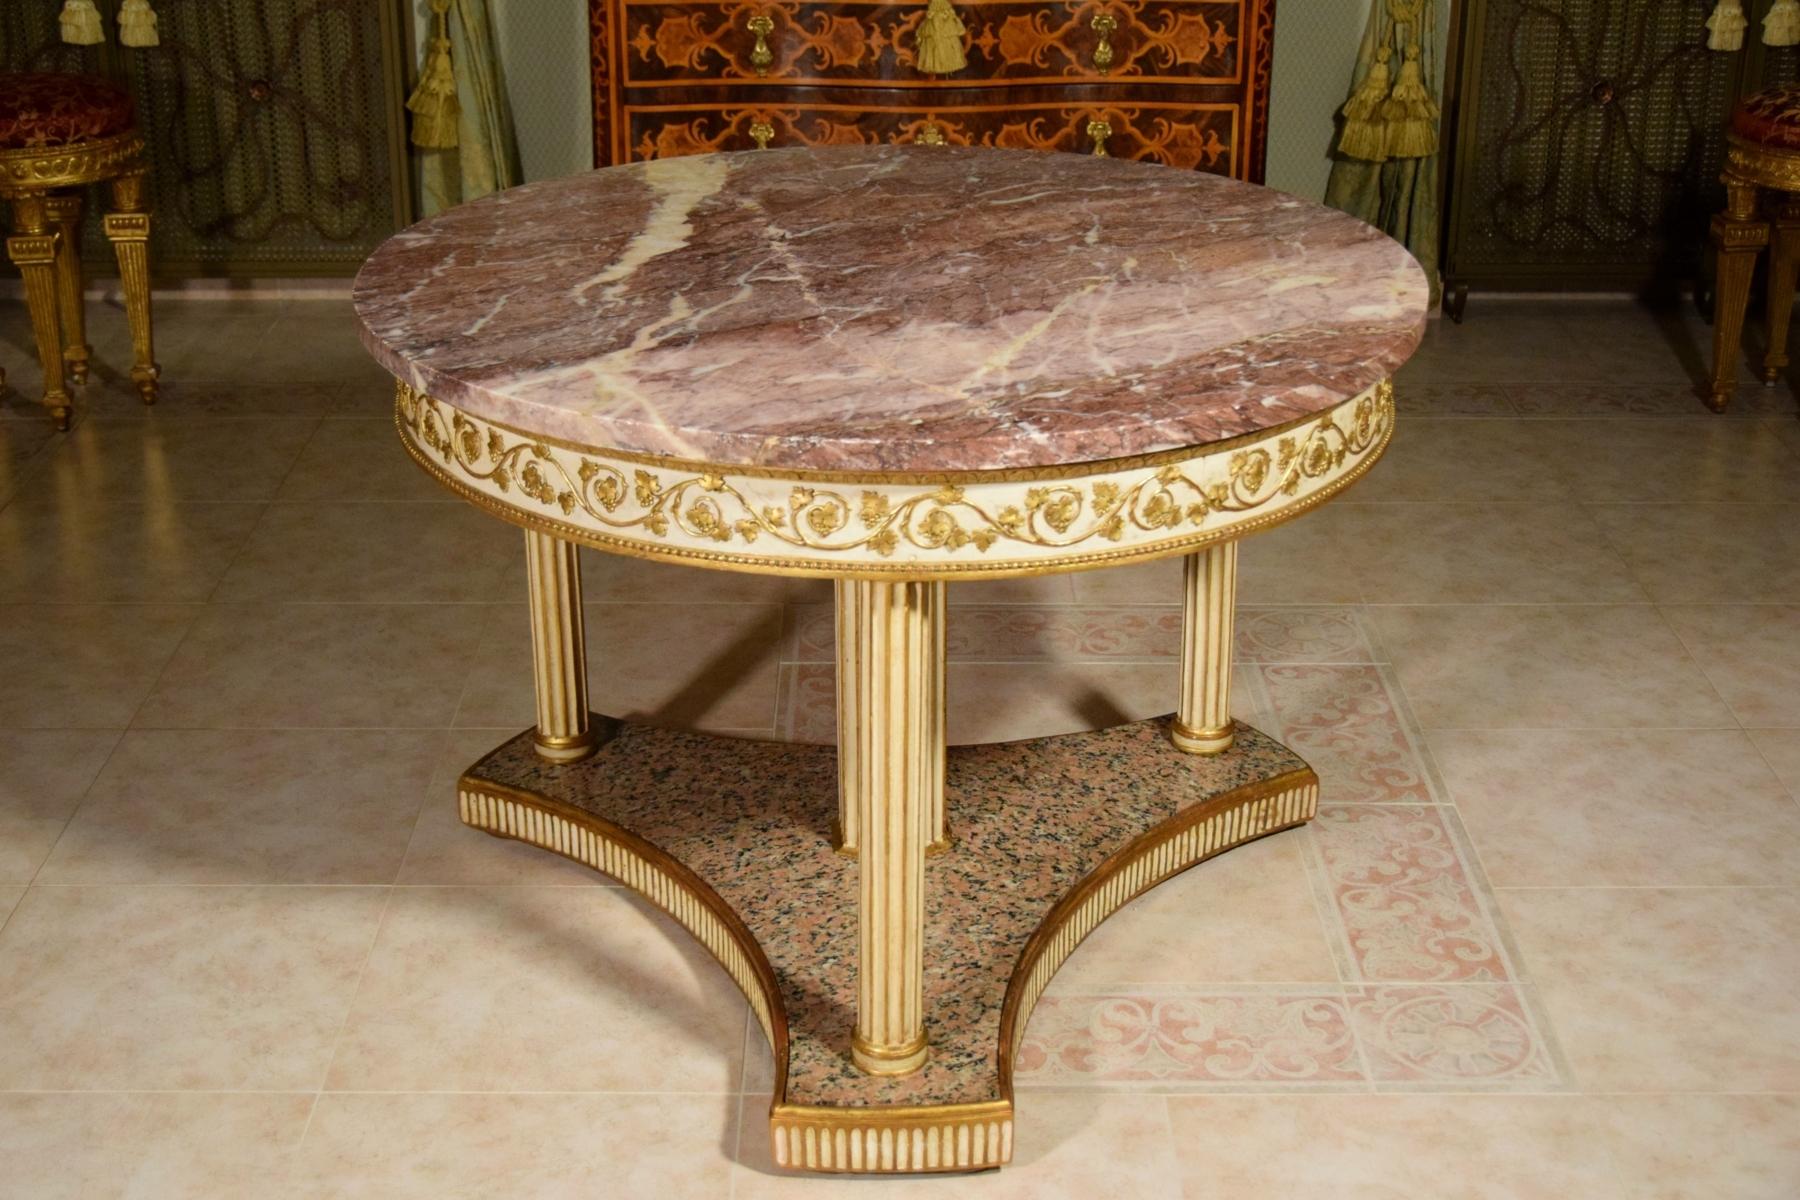 Hand-Carved 18th Century, Italian Neoclassical Round Lacquered Wood Center Table